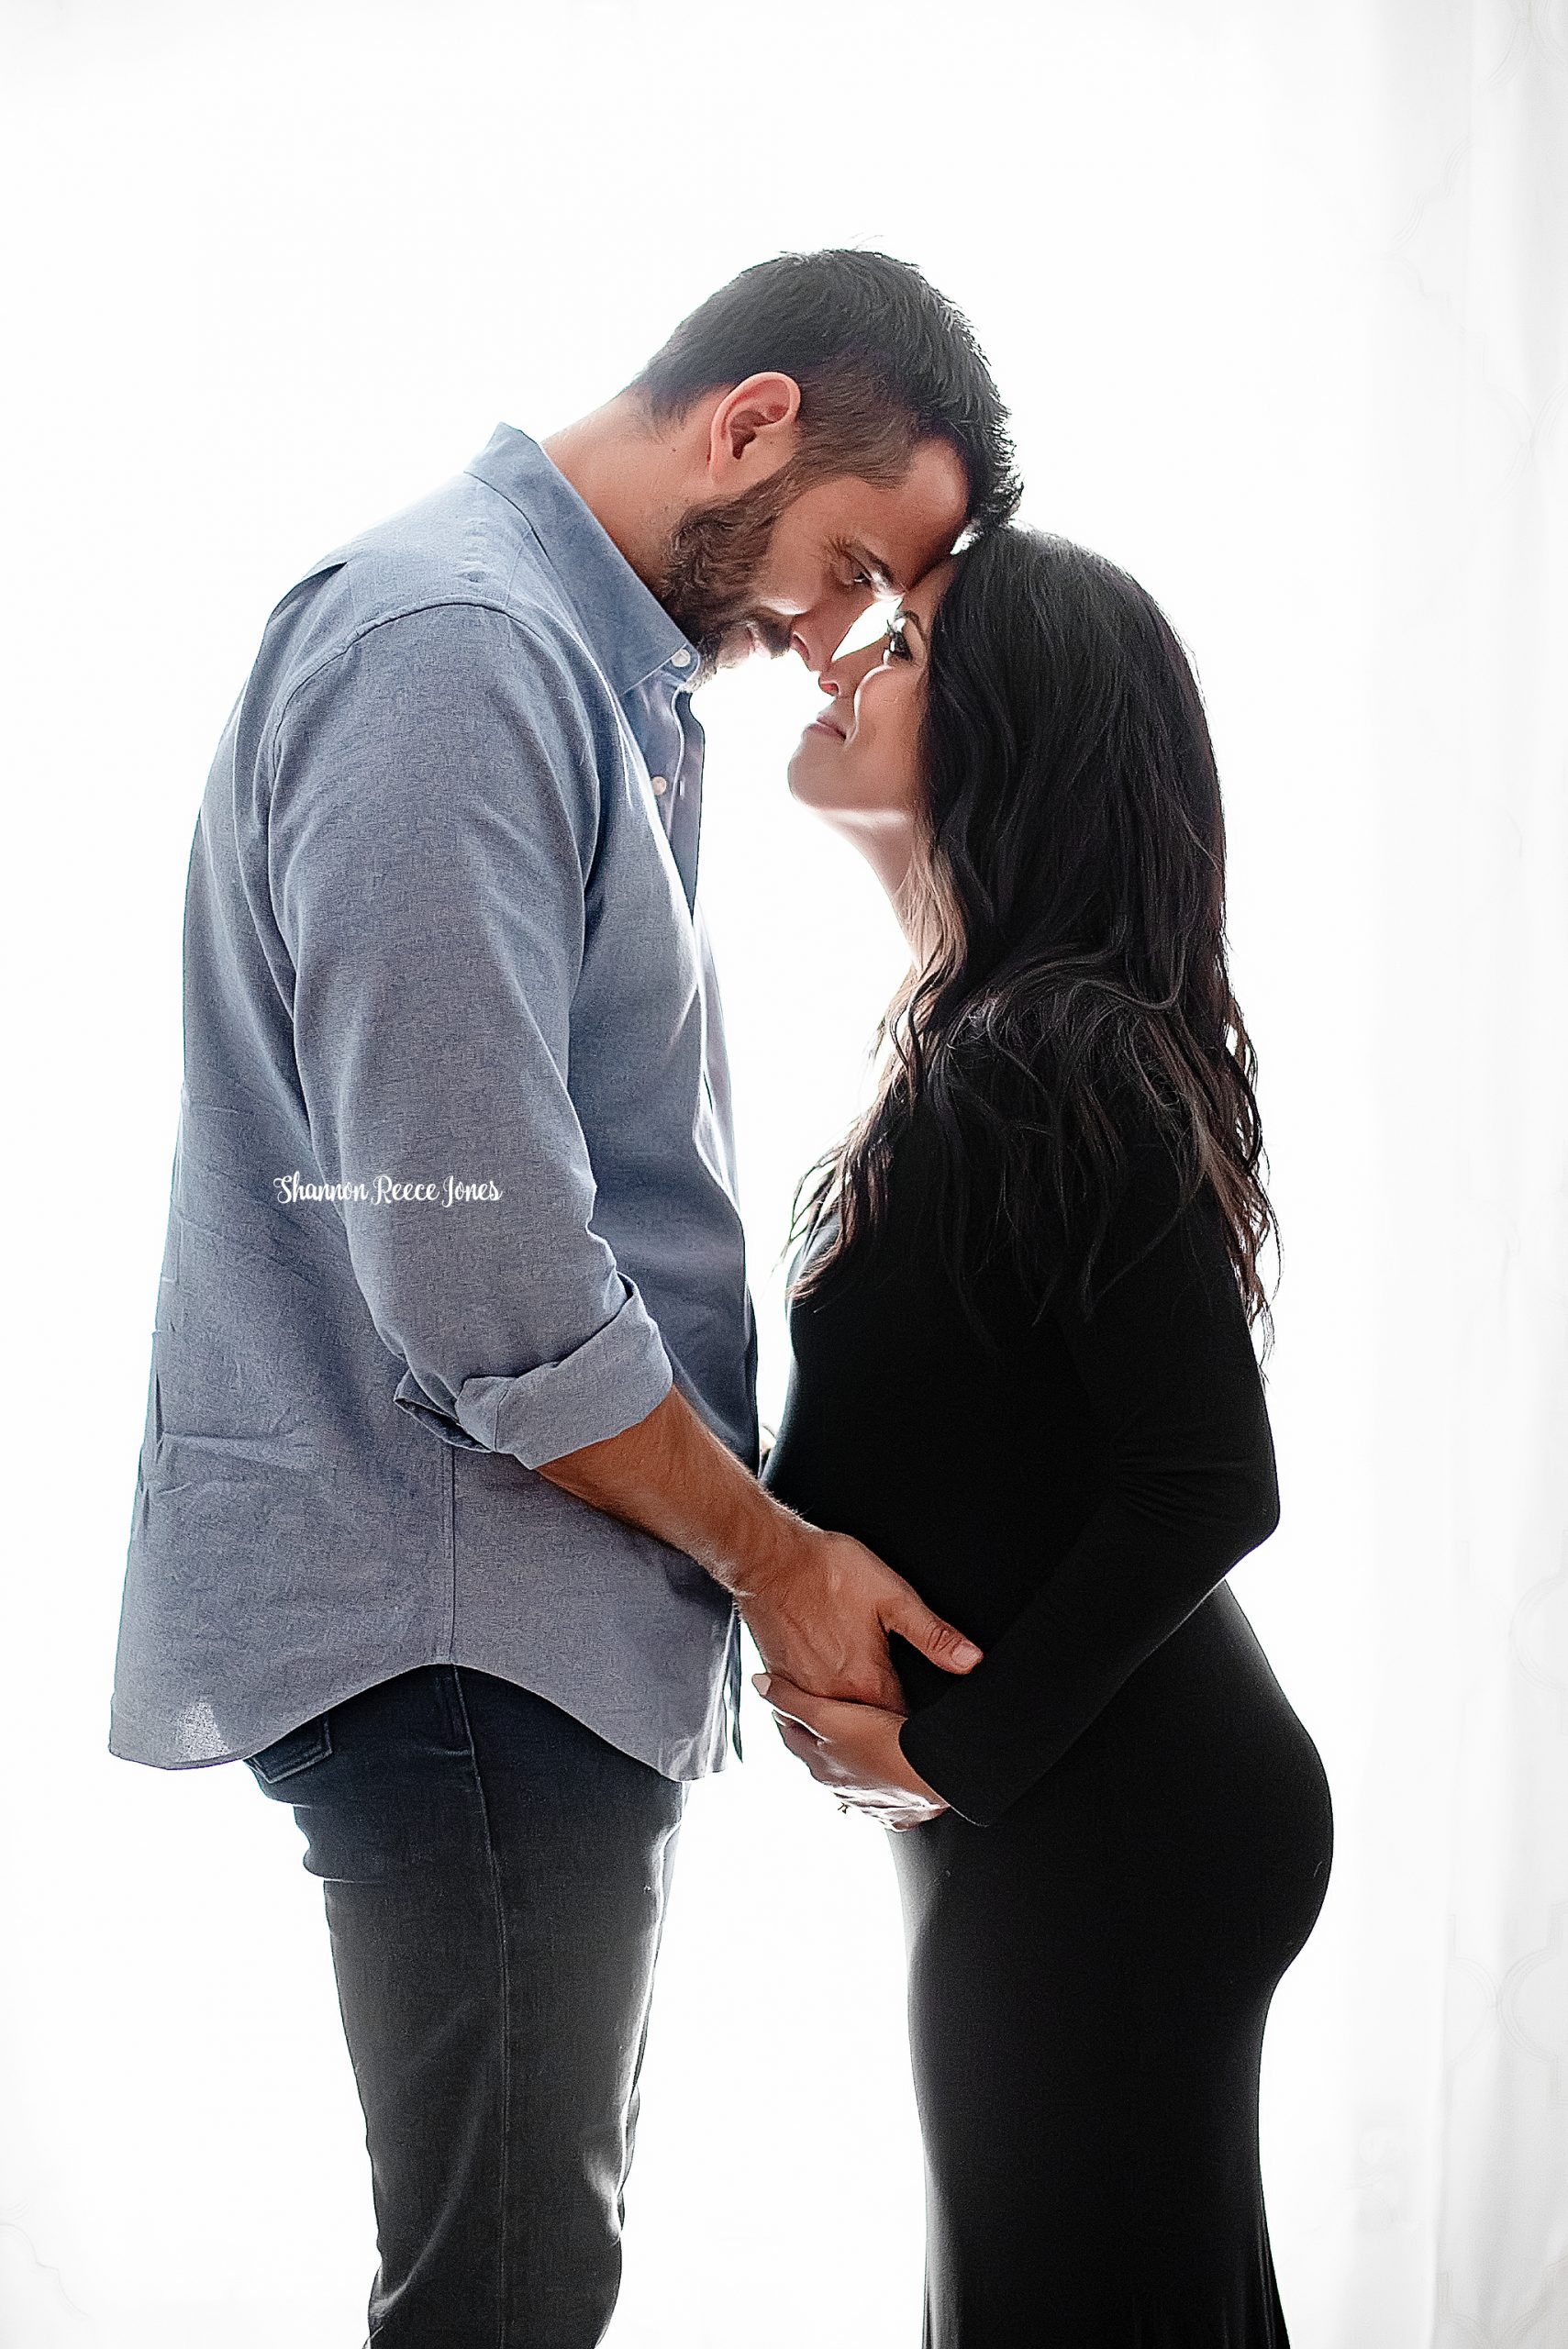 studio maternity photography texas, parents looking into each other's eyes